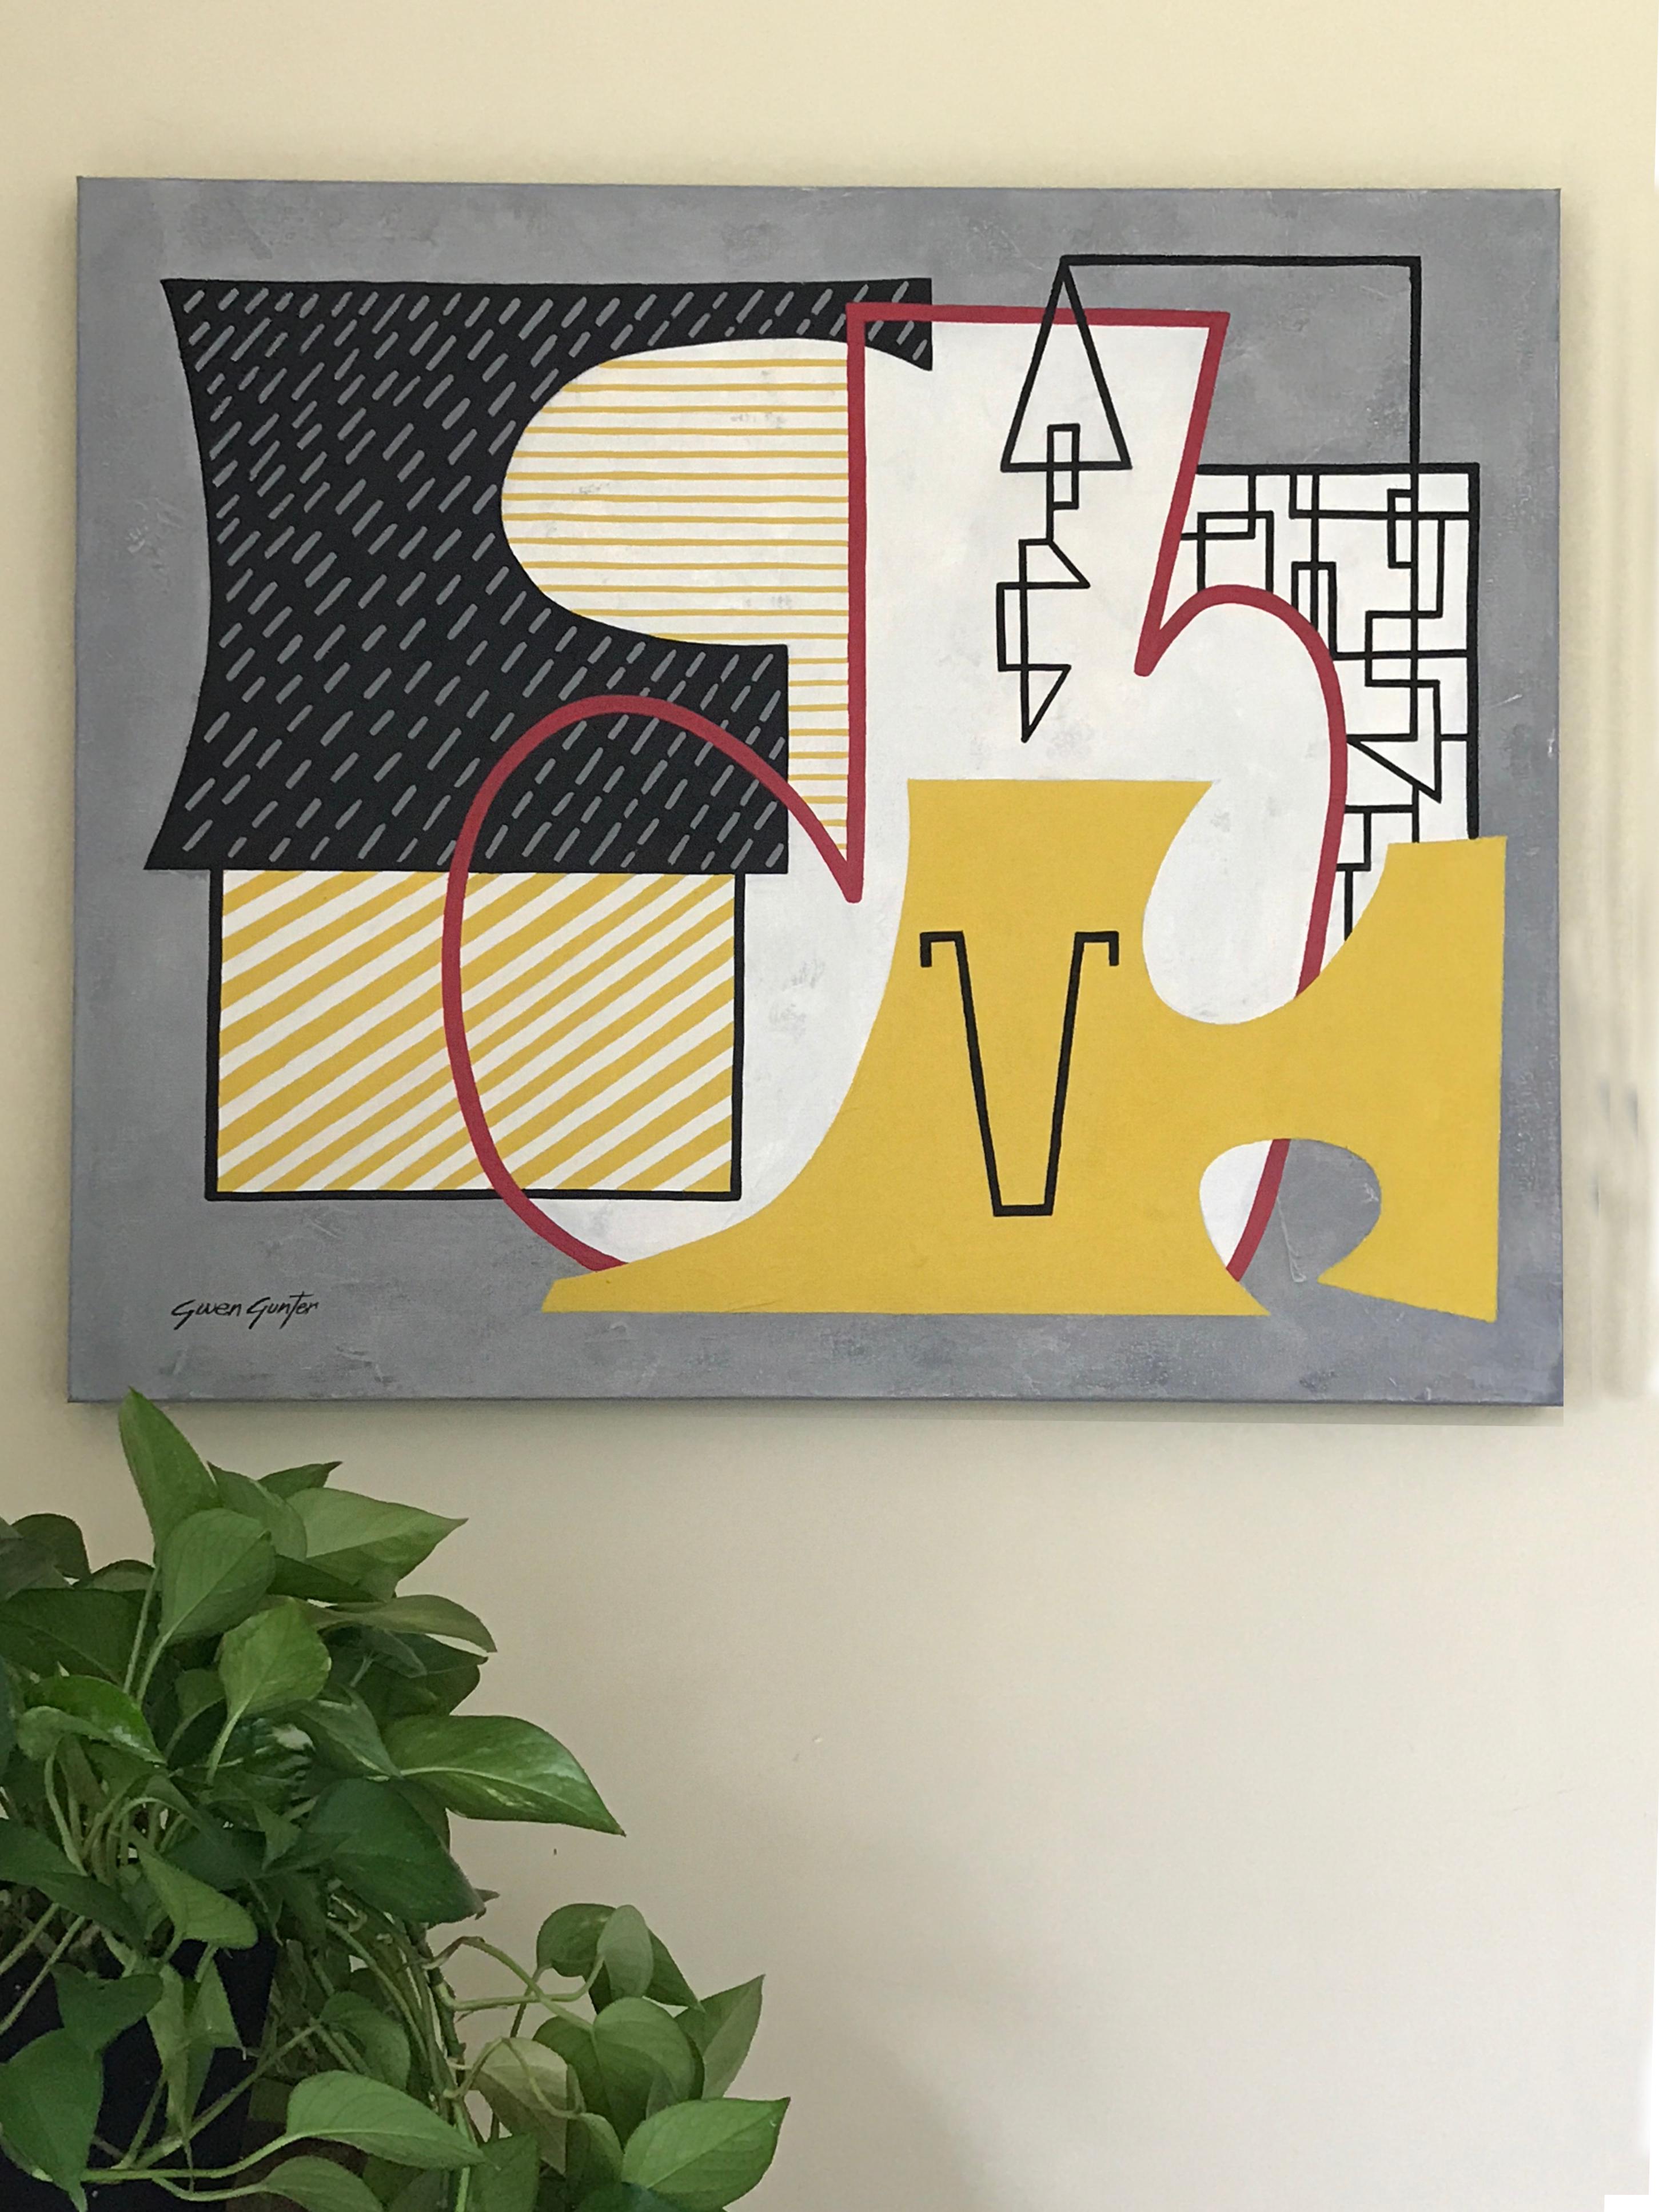 <p>Artist Comments<br />Artist Gwen Gunter explains that the shapes and lines in this modernist painting form a structure that reflects the building of a safe home base. Strong, anchoring forms constructed in a simple, assuring palette lend the